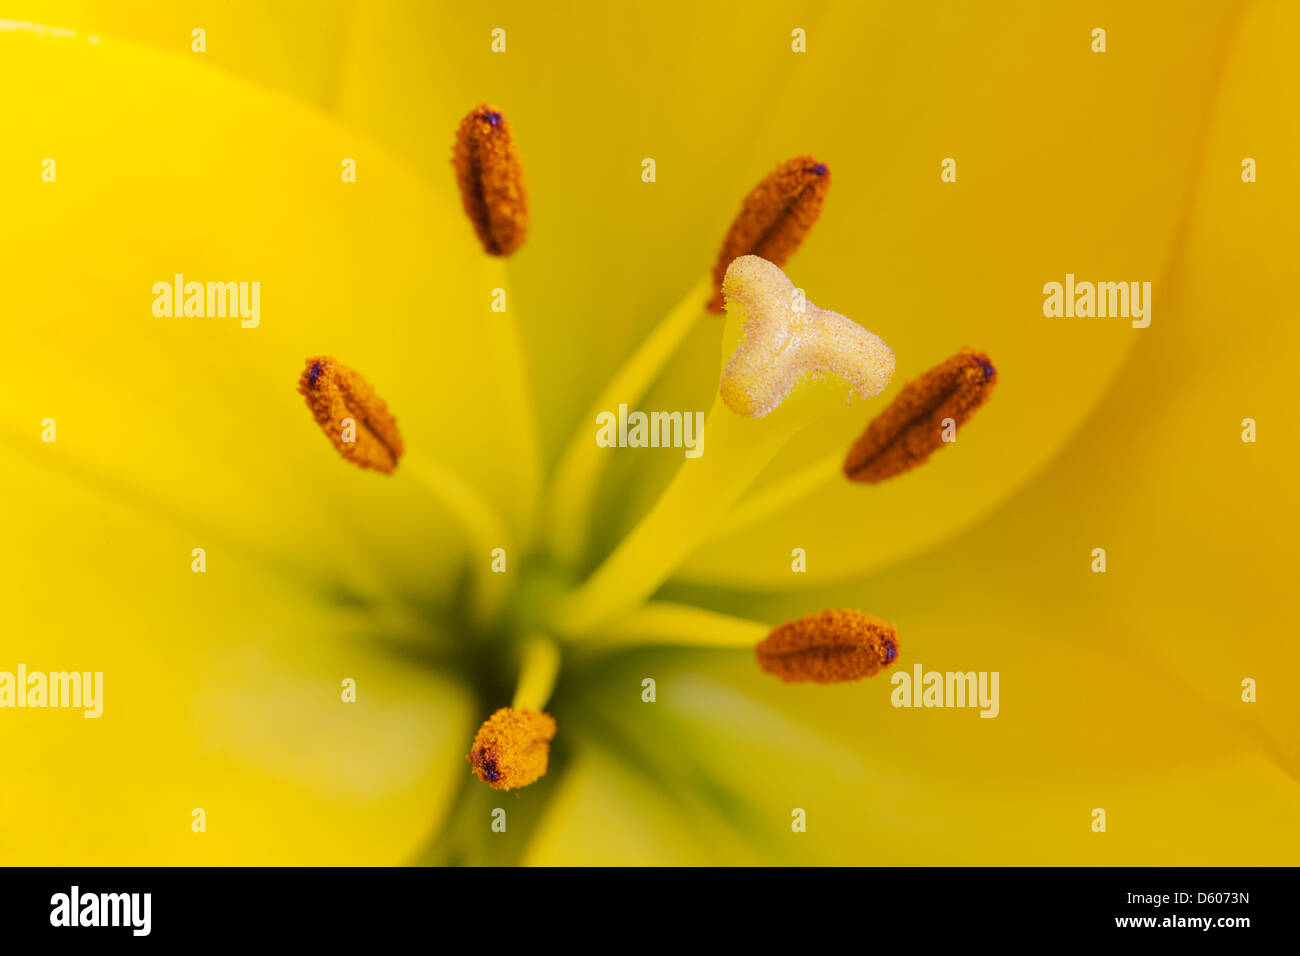 Close-up of pistil and stamens of yellow lily Stock Photo